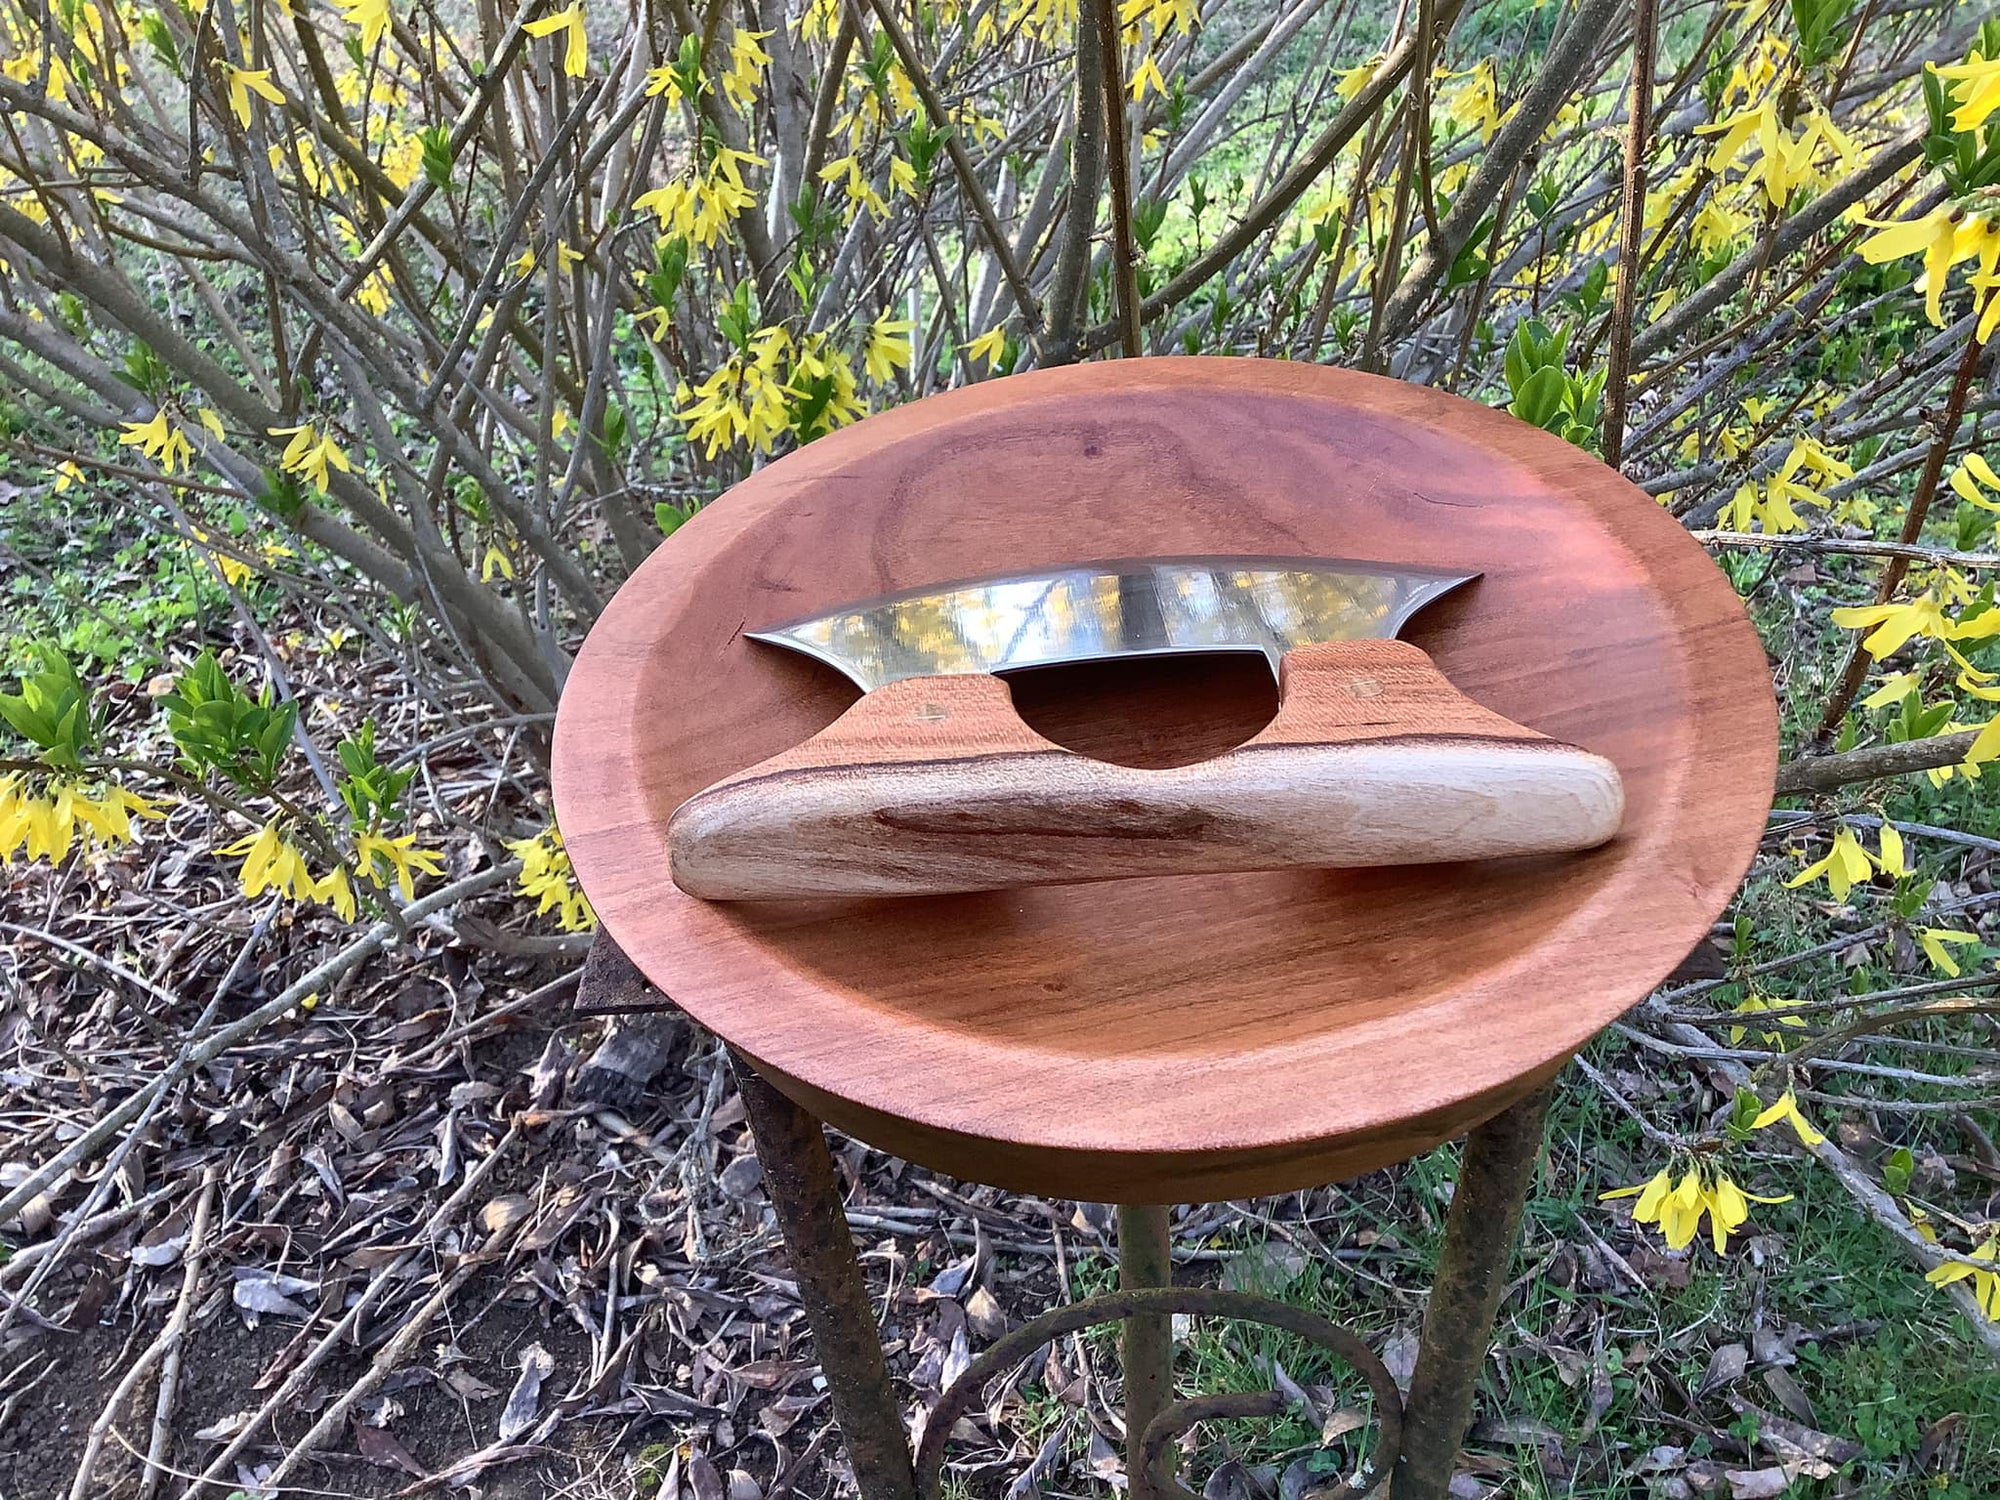 An exquisite Ulu Bowl and Knife with Handmade Handle sits on top of a flower pot, showcasing both functionality and elegance.